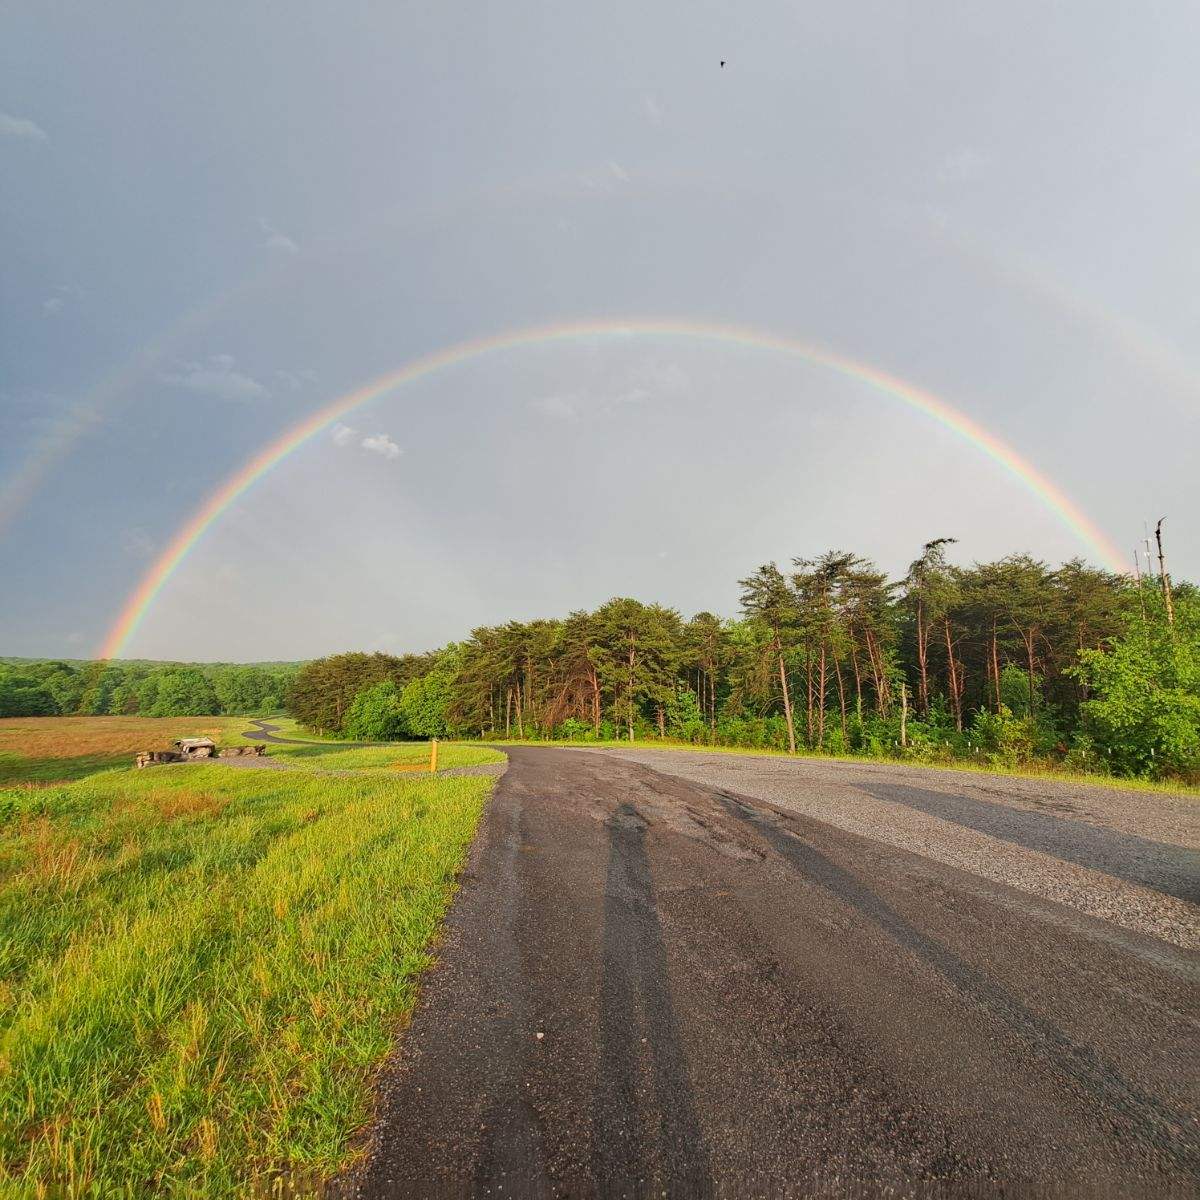 Somewhere over the rainbow is the Elk & Bison Prairie, at least it was today. Bugle Corps Volunteer, Jan Gray was in the right place today and able to see this beautiful double rainbow and get a couple amazing photos to share. #rainbows #mylbladventure